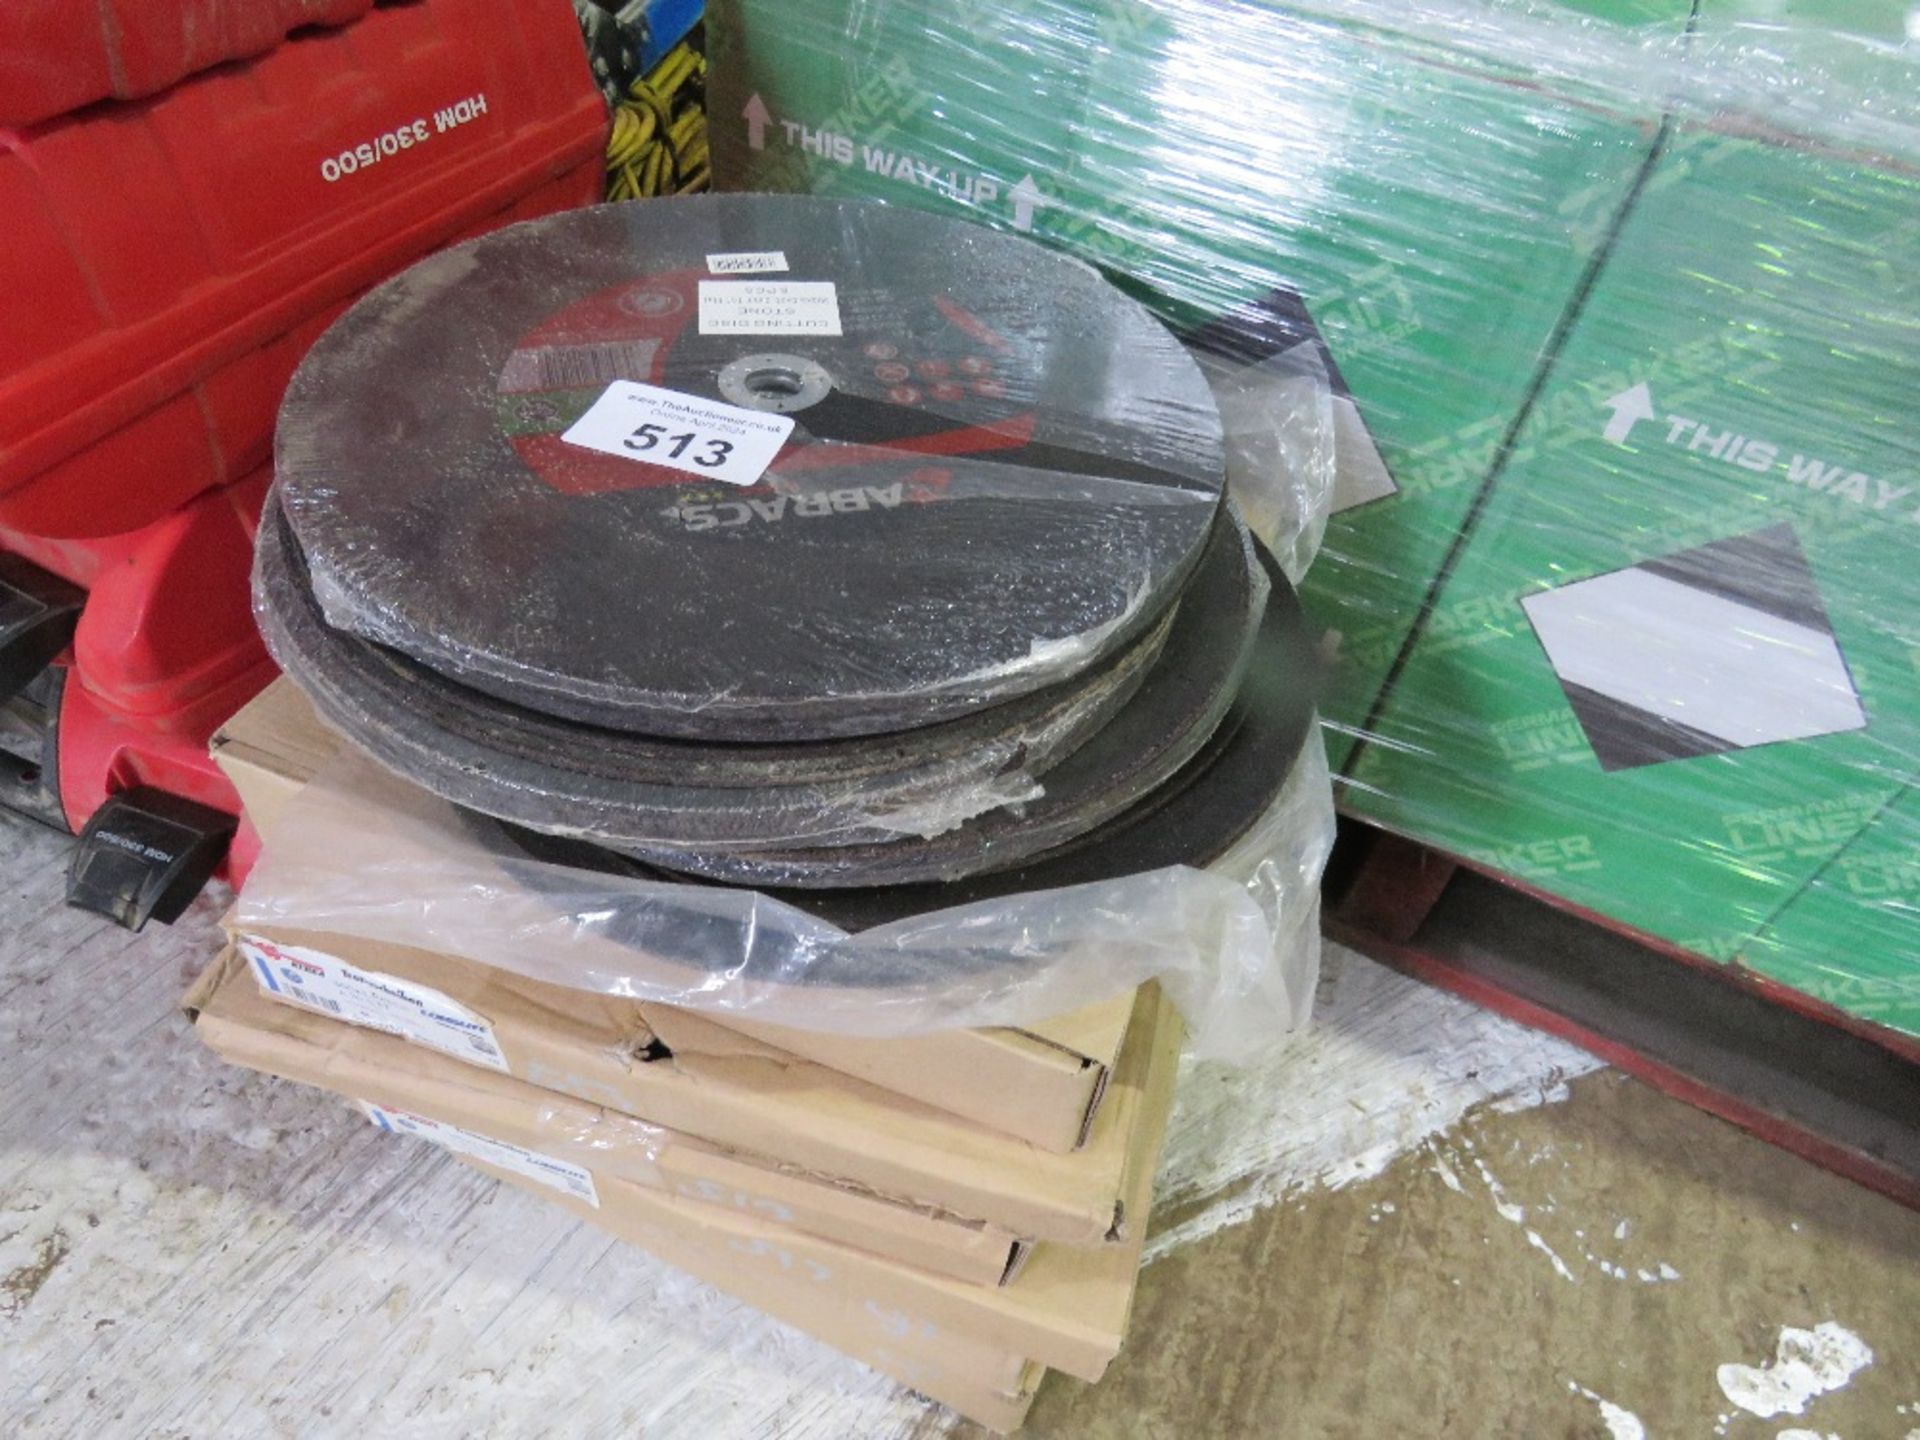 LARGE QUANTITY OF STONE AND STEEL CUTTING/GRINDING DISCS, 300MM DIAMETER. SOURCED FROM COMPANY LIQUI